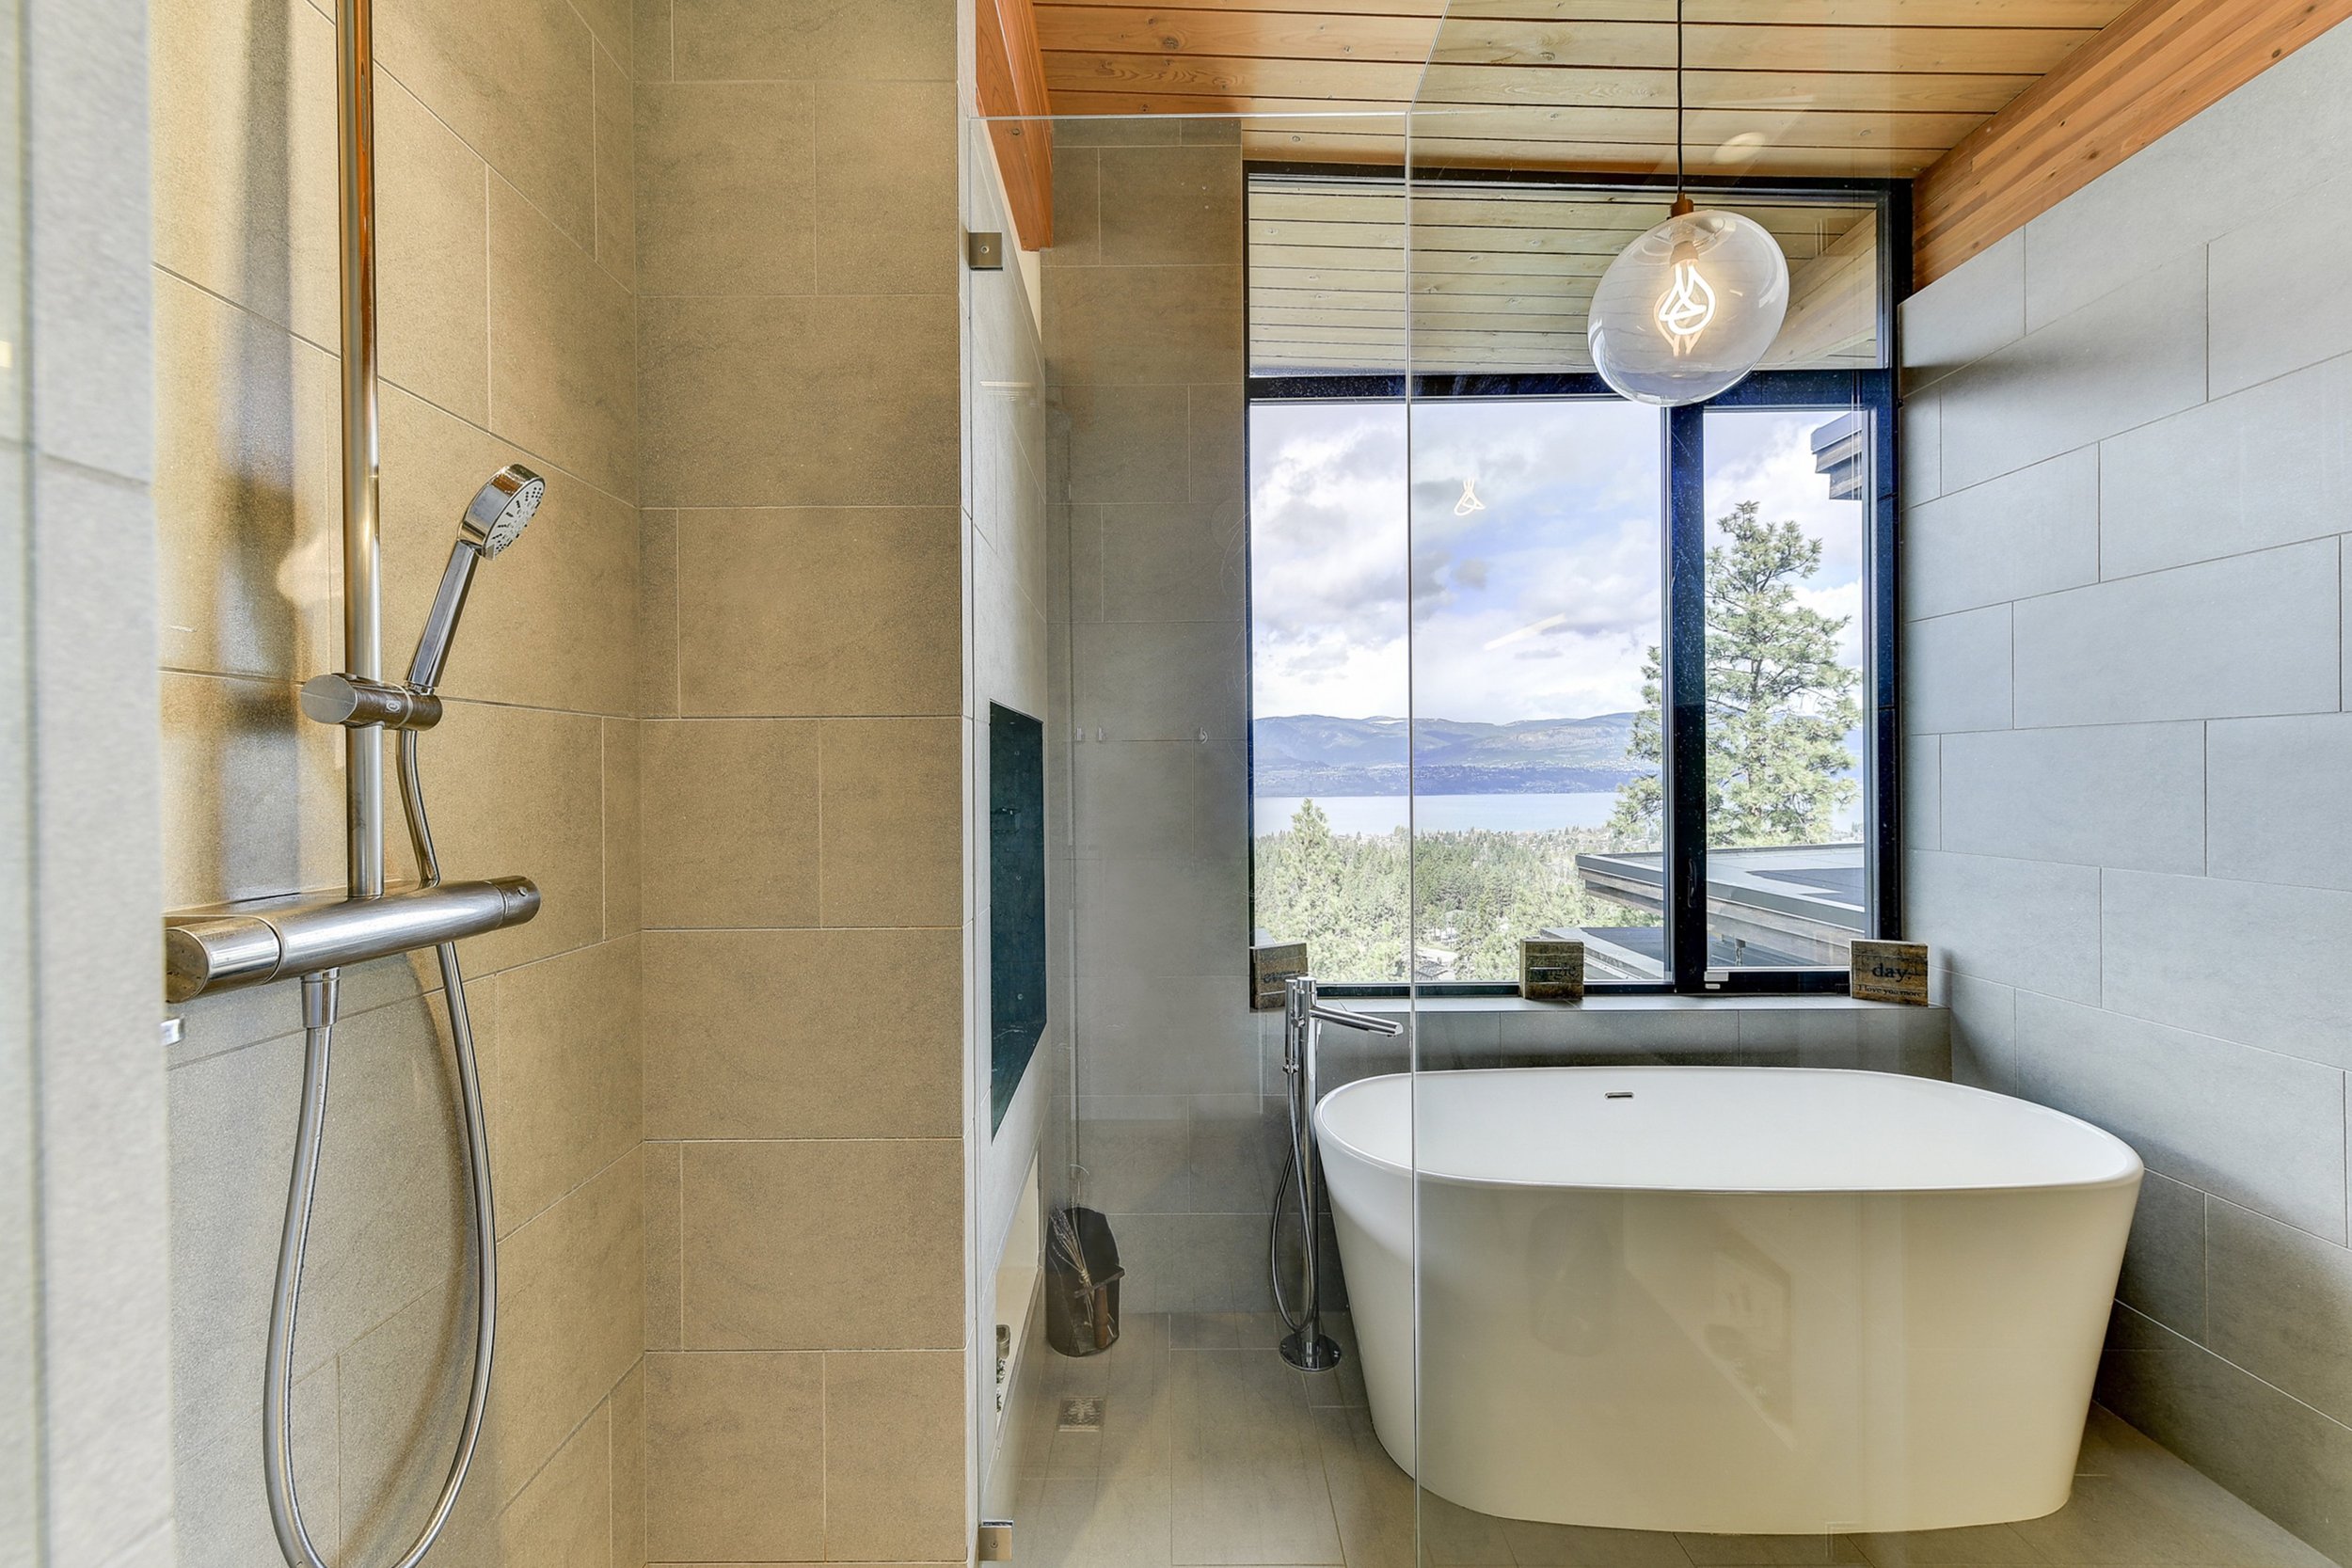 044-Keys-to-Kelowna-Airbnb-vacation-rental-property-management-Luxury-Family-Home-Upper-Mission-Ensuite-042.jpg